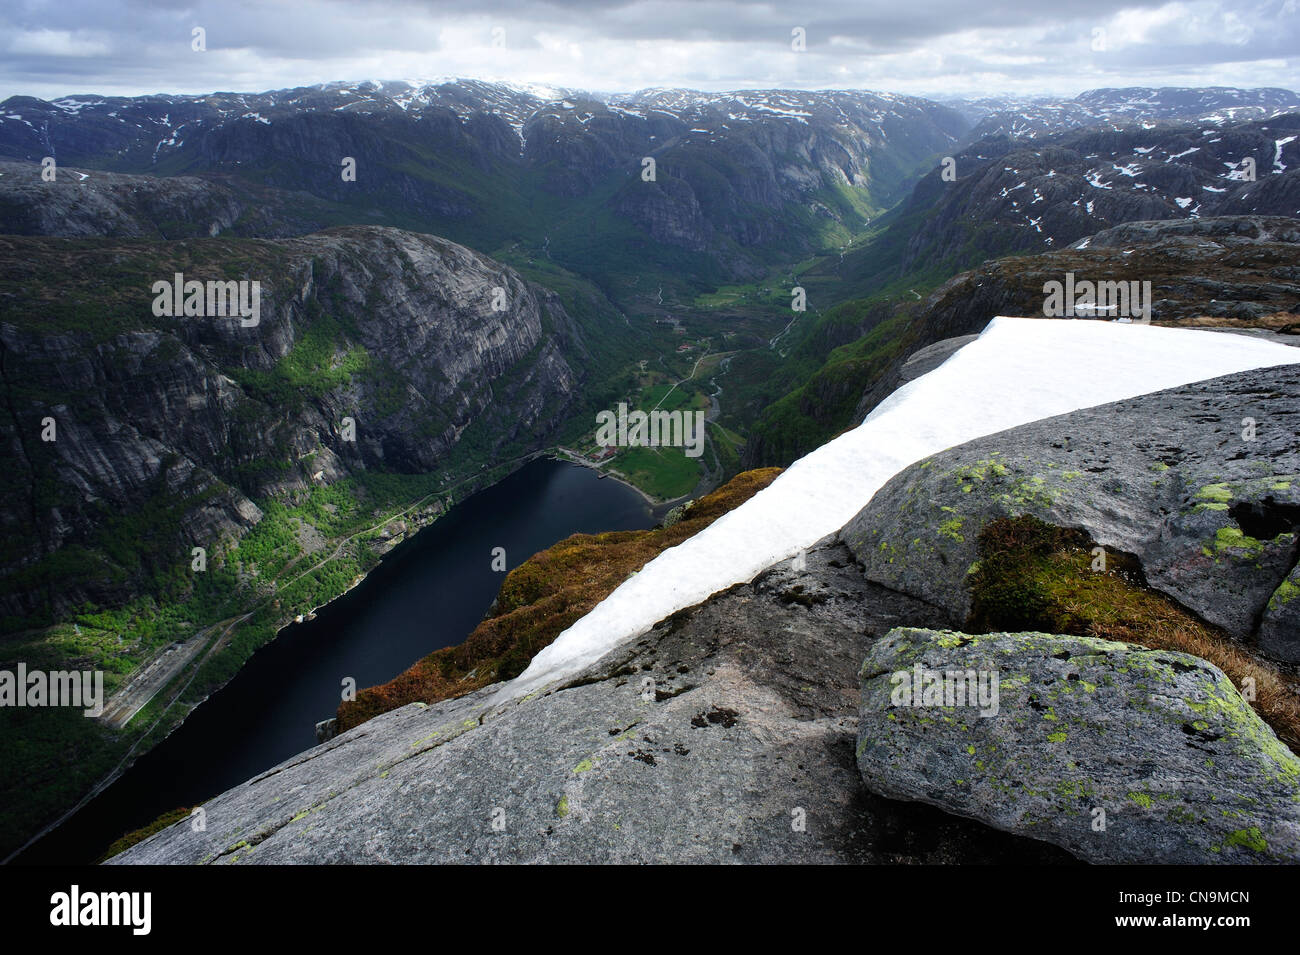 Norway, Rogaland County, Lysebotn, Kjerag rock famous for BASE jumpers Stock Photo